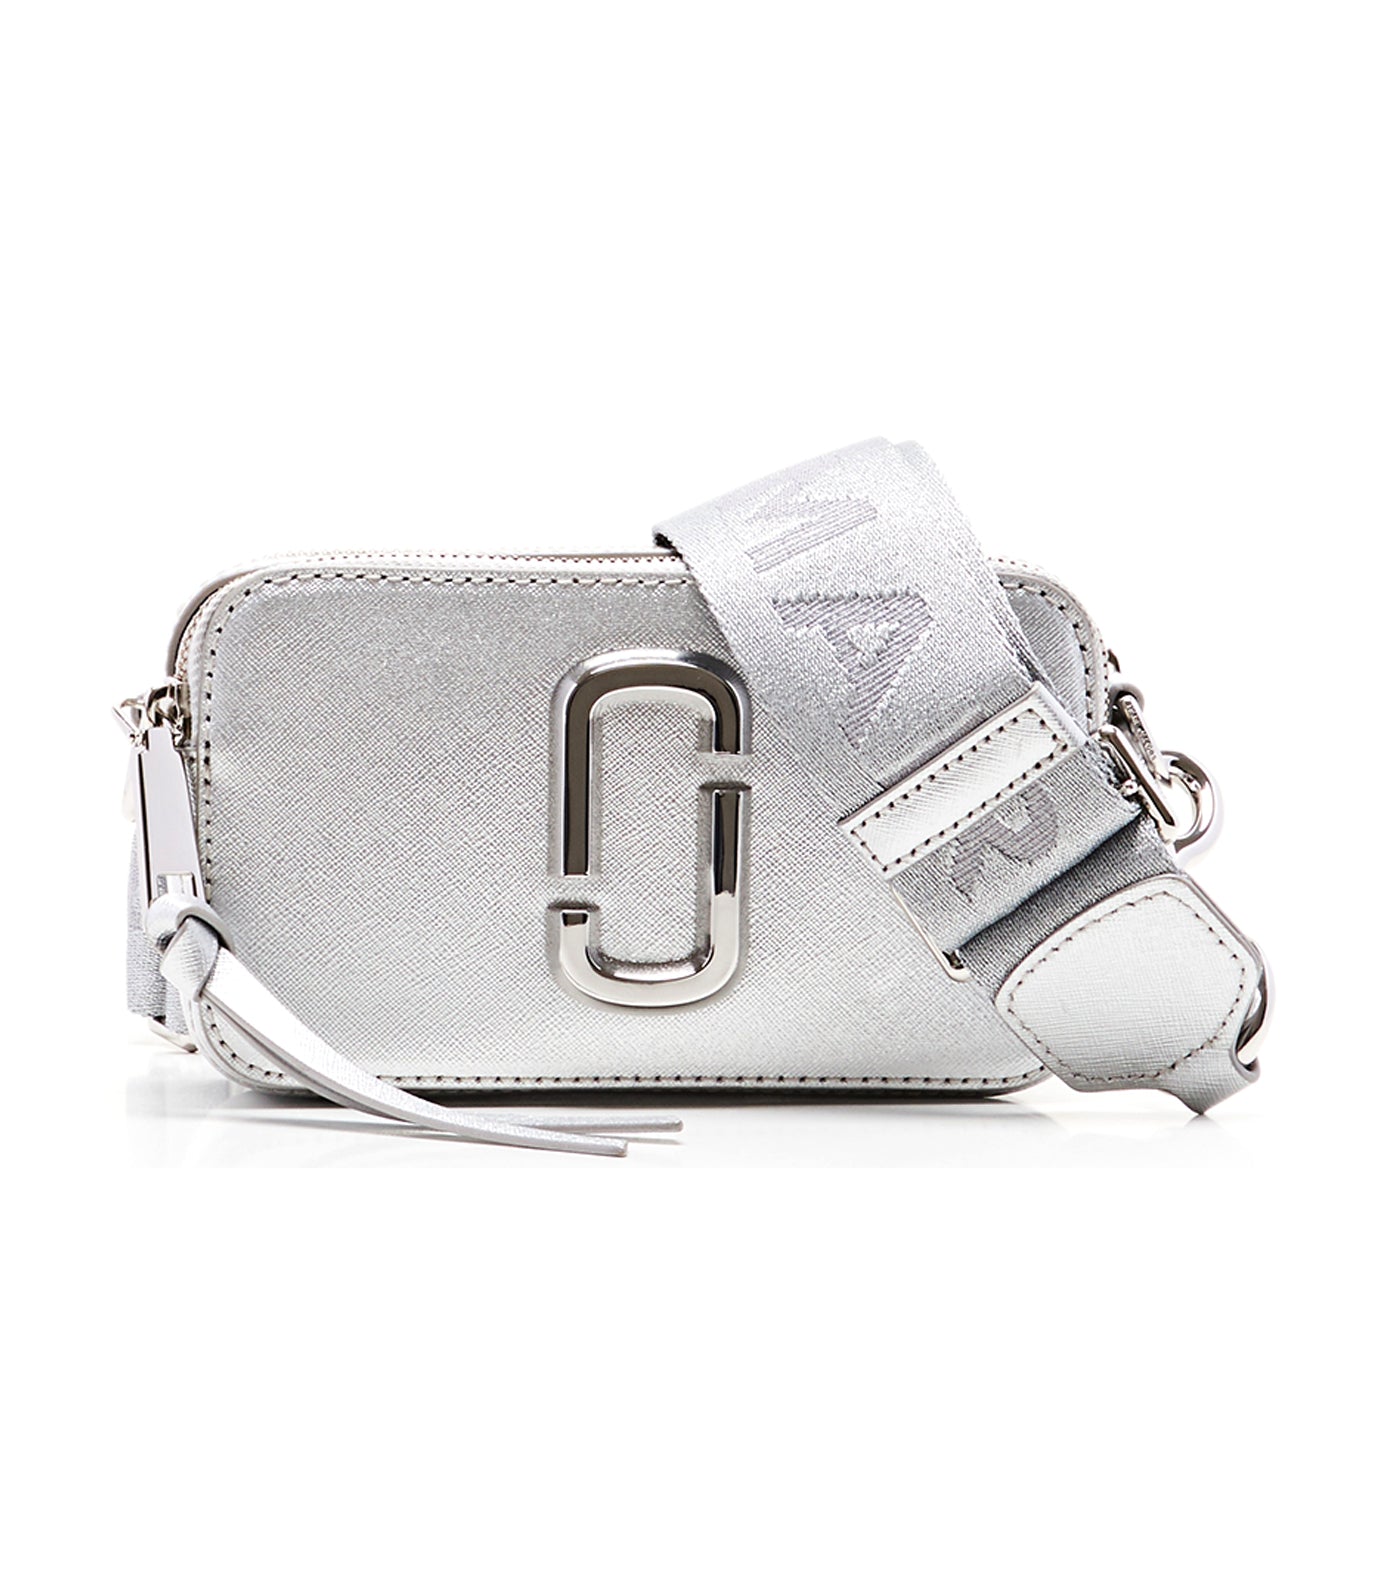 Marc Jacobs 'the Snapshot' Small Camera Bag in Metallic